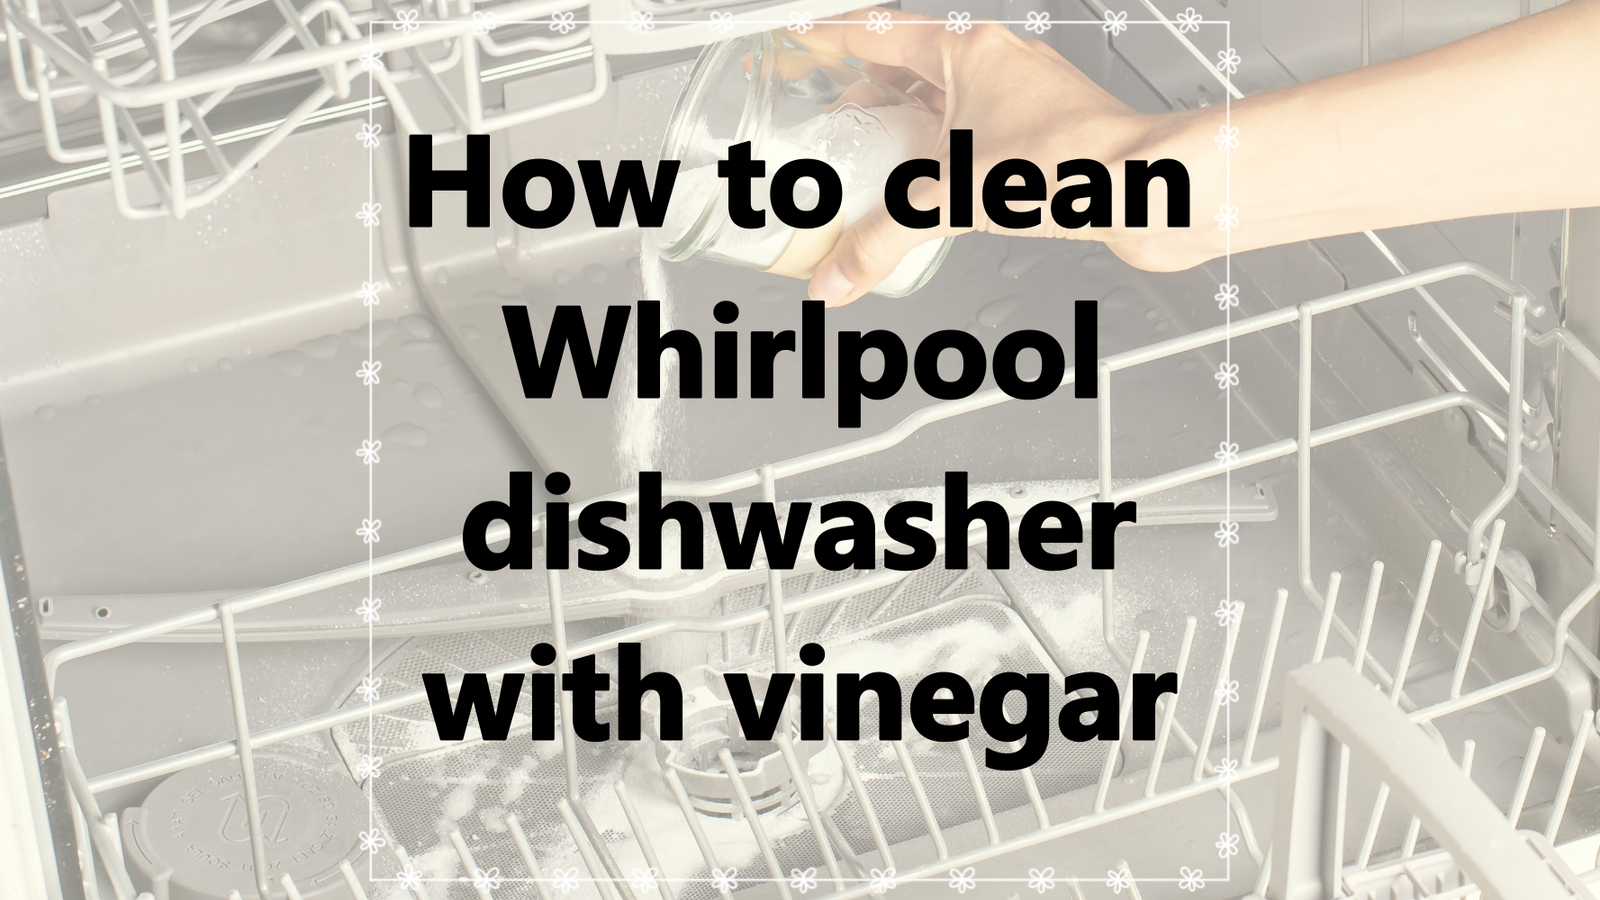 How to clean Whirlpool dishwasher with vinegar